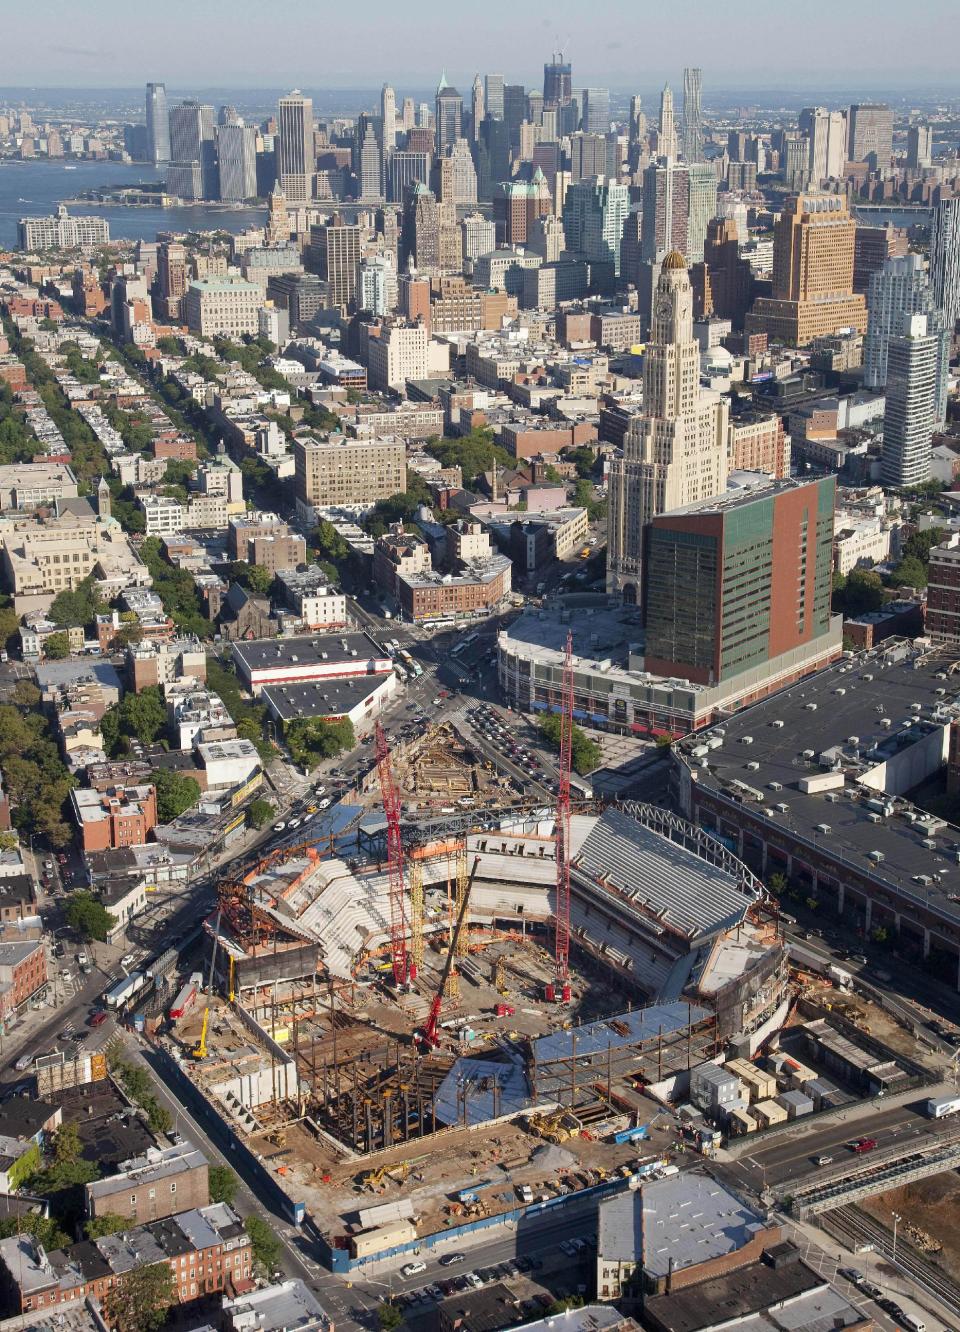 FILE - In this aerieal file photo of July 27, 2011, construction of the Barclays Center is underway for the new home of the Nets basketball team in the Brooklyn borough of New York. On Friday, Sept. 21, 2012, after decades without a professional sports team, New York City’s ascendant borough is hitting the major leagues again - but this time it’s basketball, not baseball, that’s taking over. (AP Photo/Mark Lennihan, File)